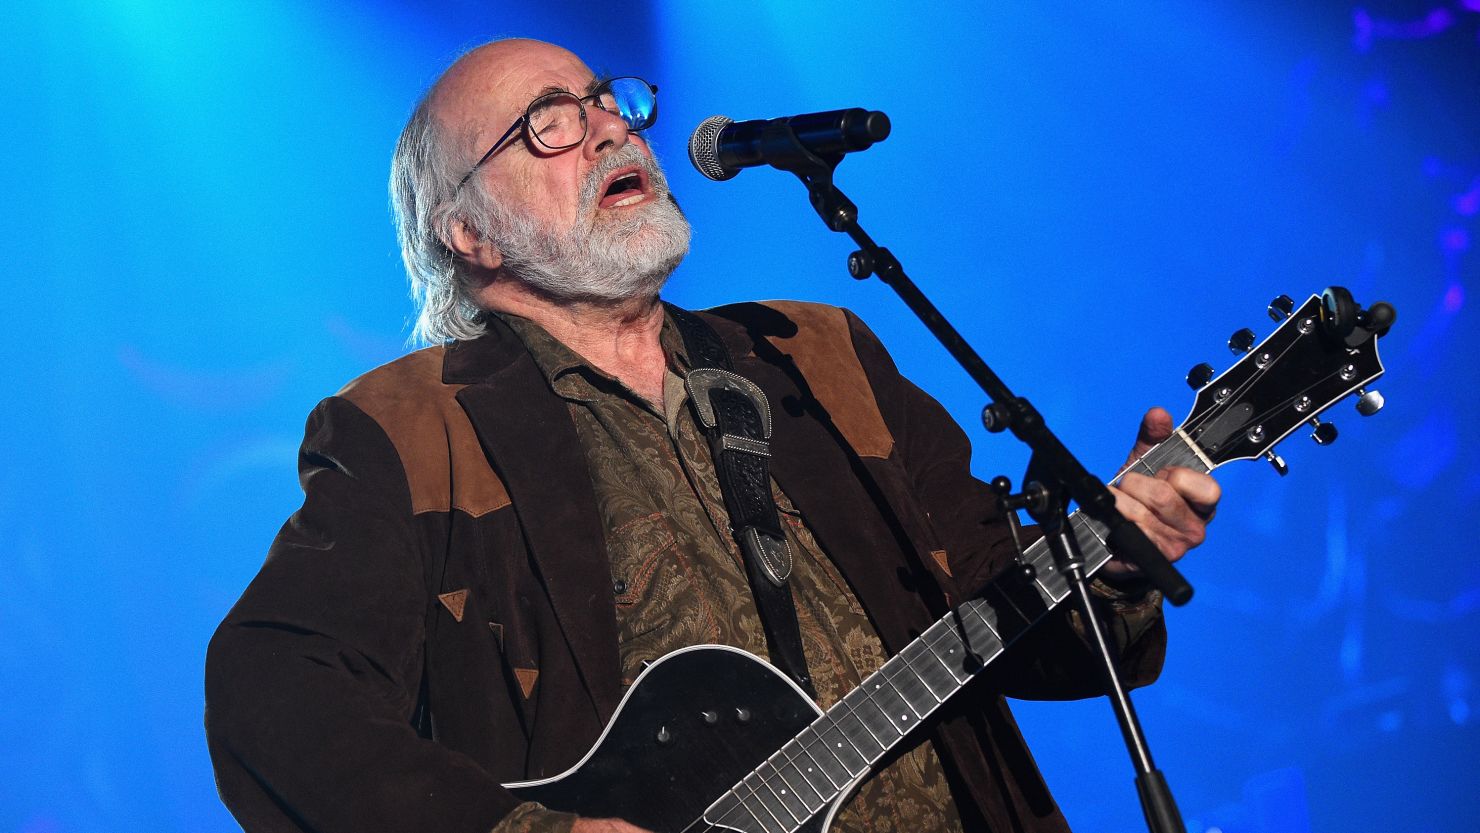 Robert Hunter performs onstage at the Songwriters Hall Of Fame 46th Annual Induction and Awards in 2015 in New York.